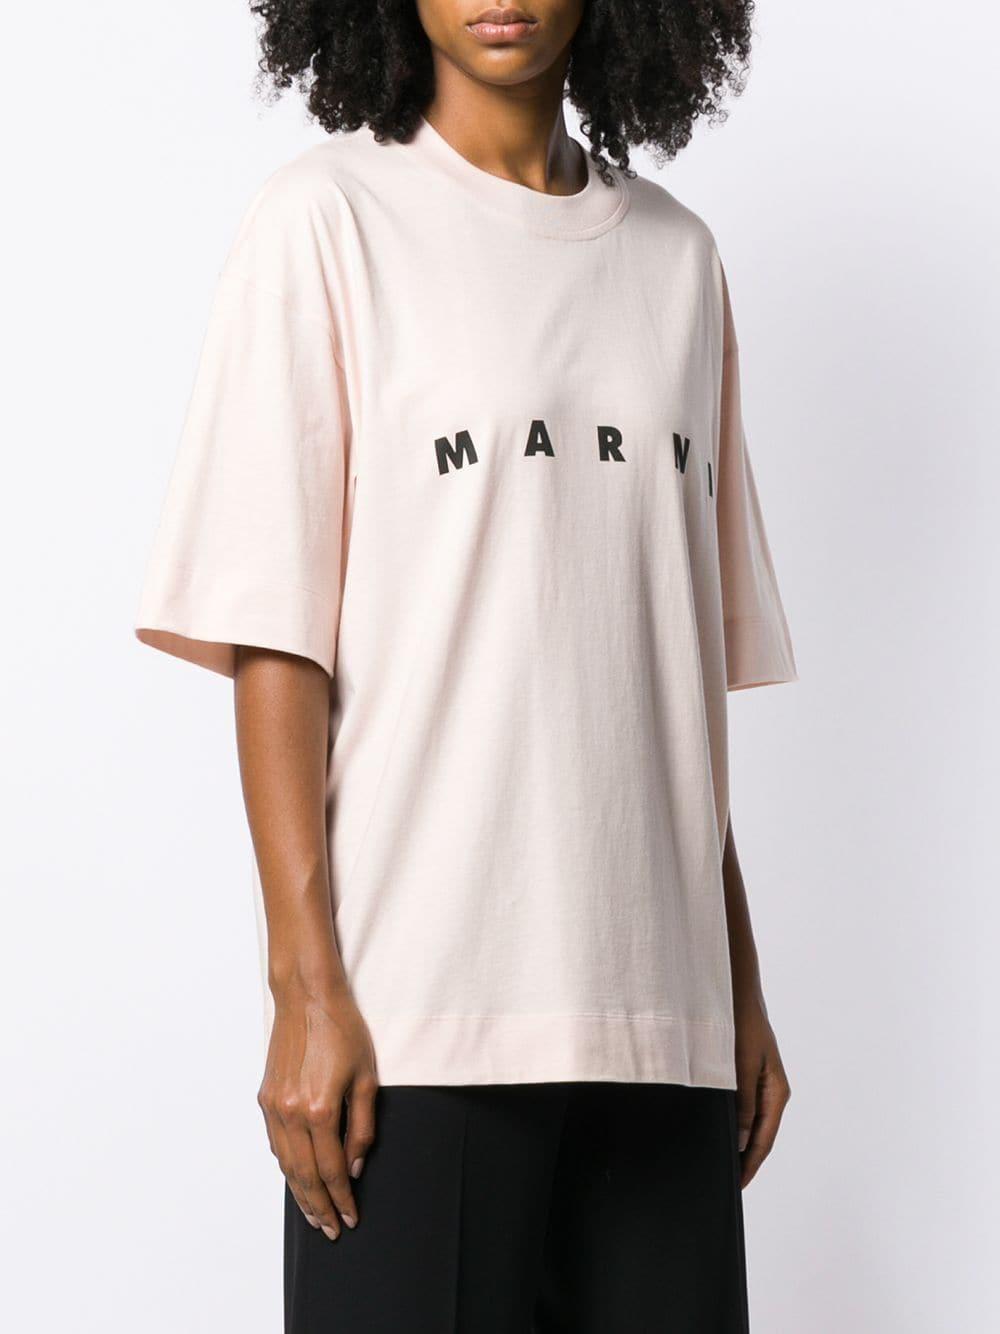 Marni Cotton Oversized Logo T-shirt in Pink - Lyst